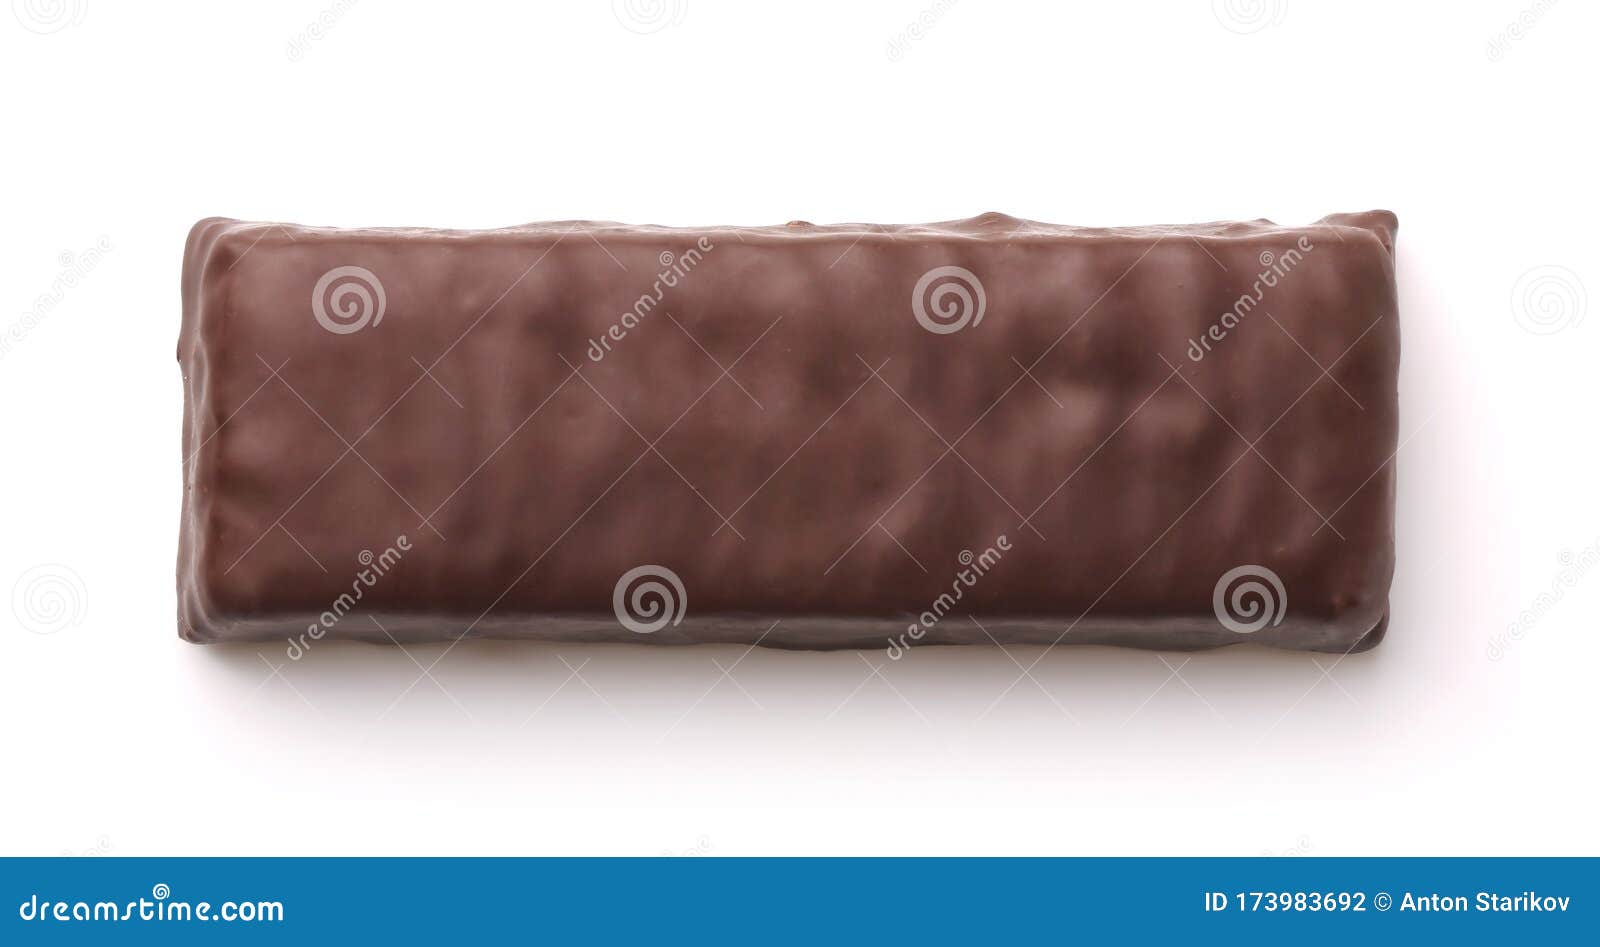 top view of unwrapped chocolate bar